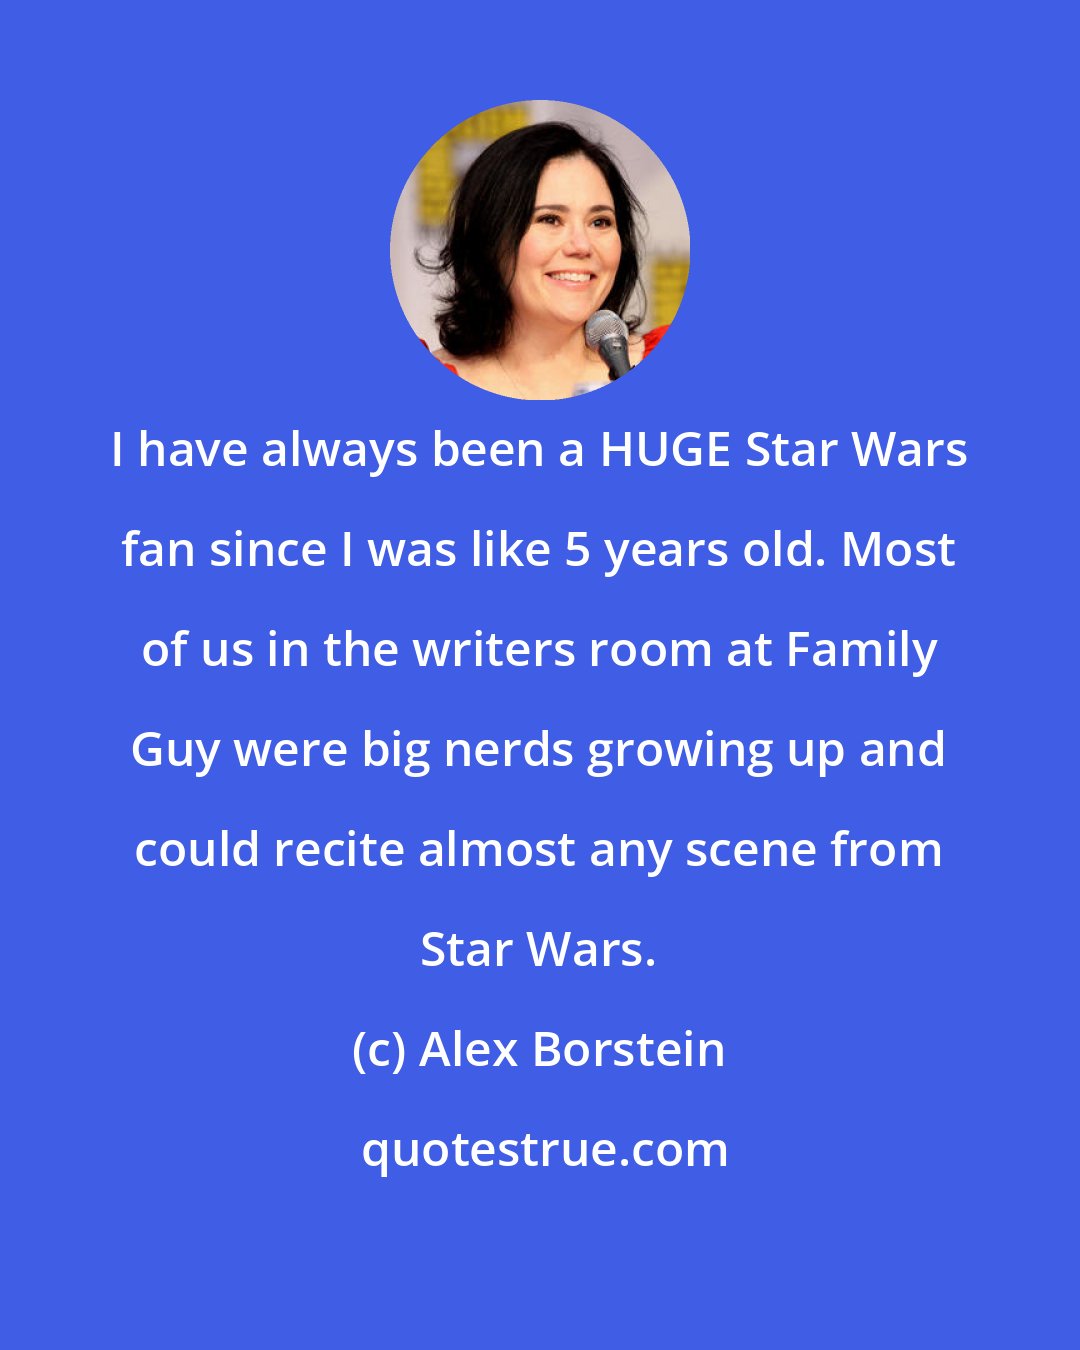 Alex Borstein: I have always been a HUGE Star Wars fan since I was like 5 years old. Most of us in the writers room at Family Guy were big nerds growing up and could recite almost any scene from Star Wars.